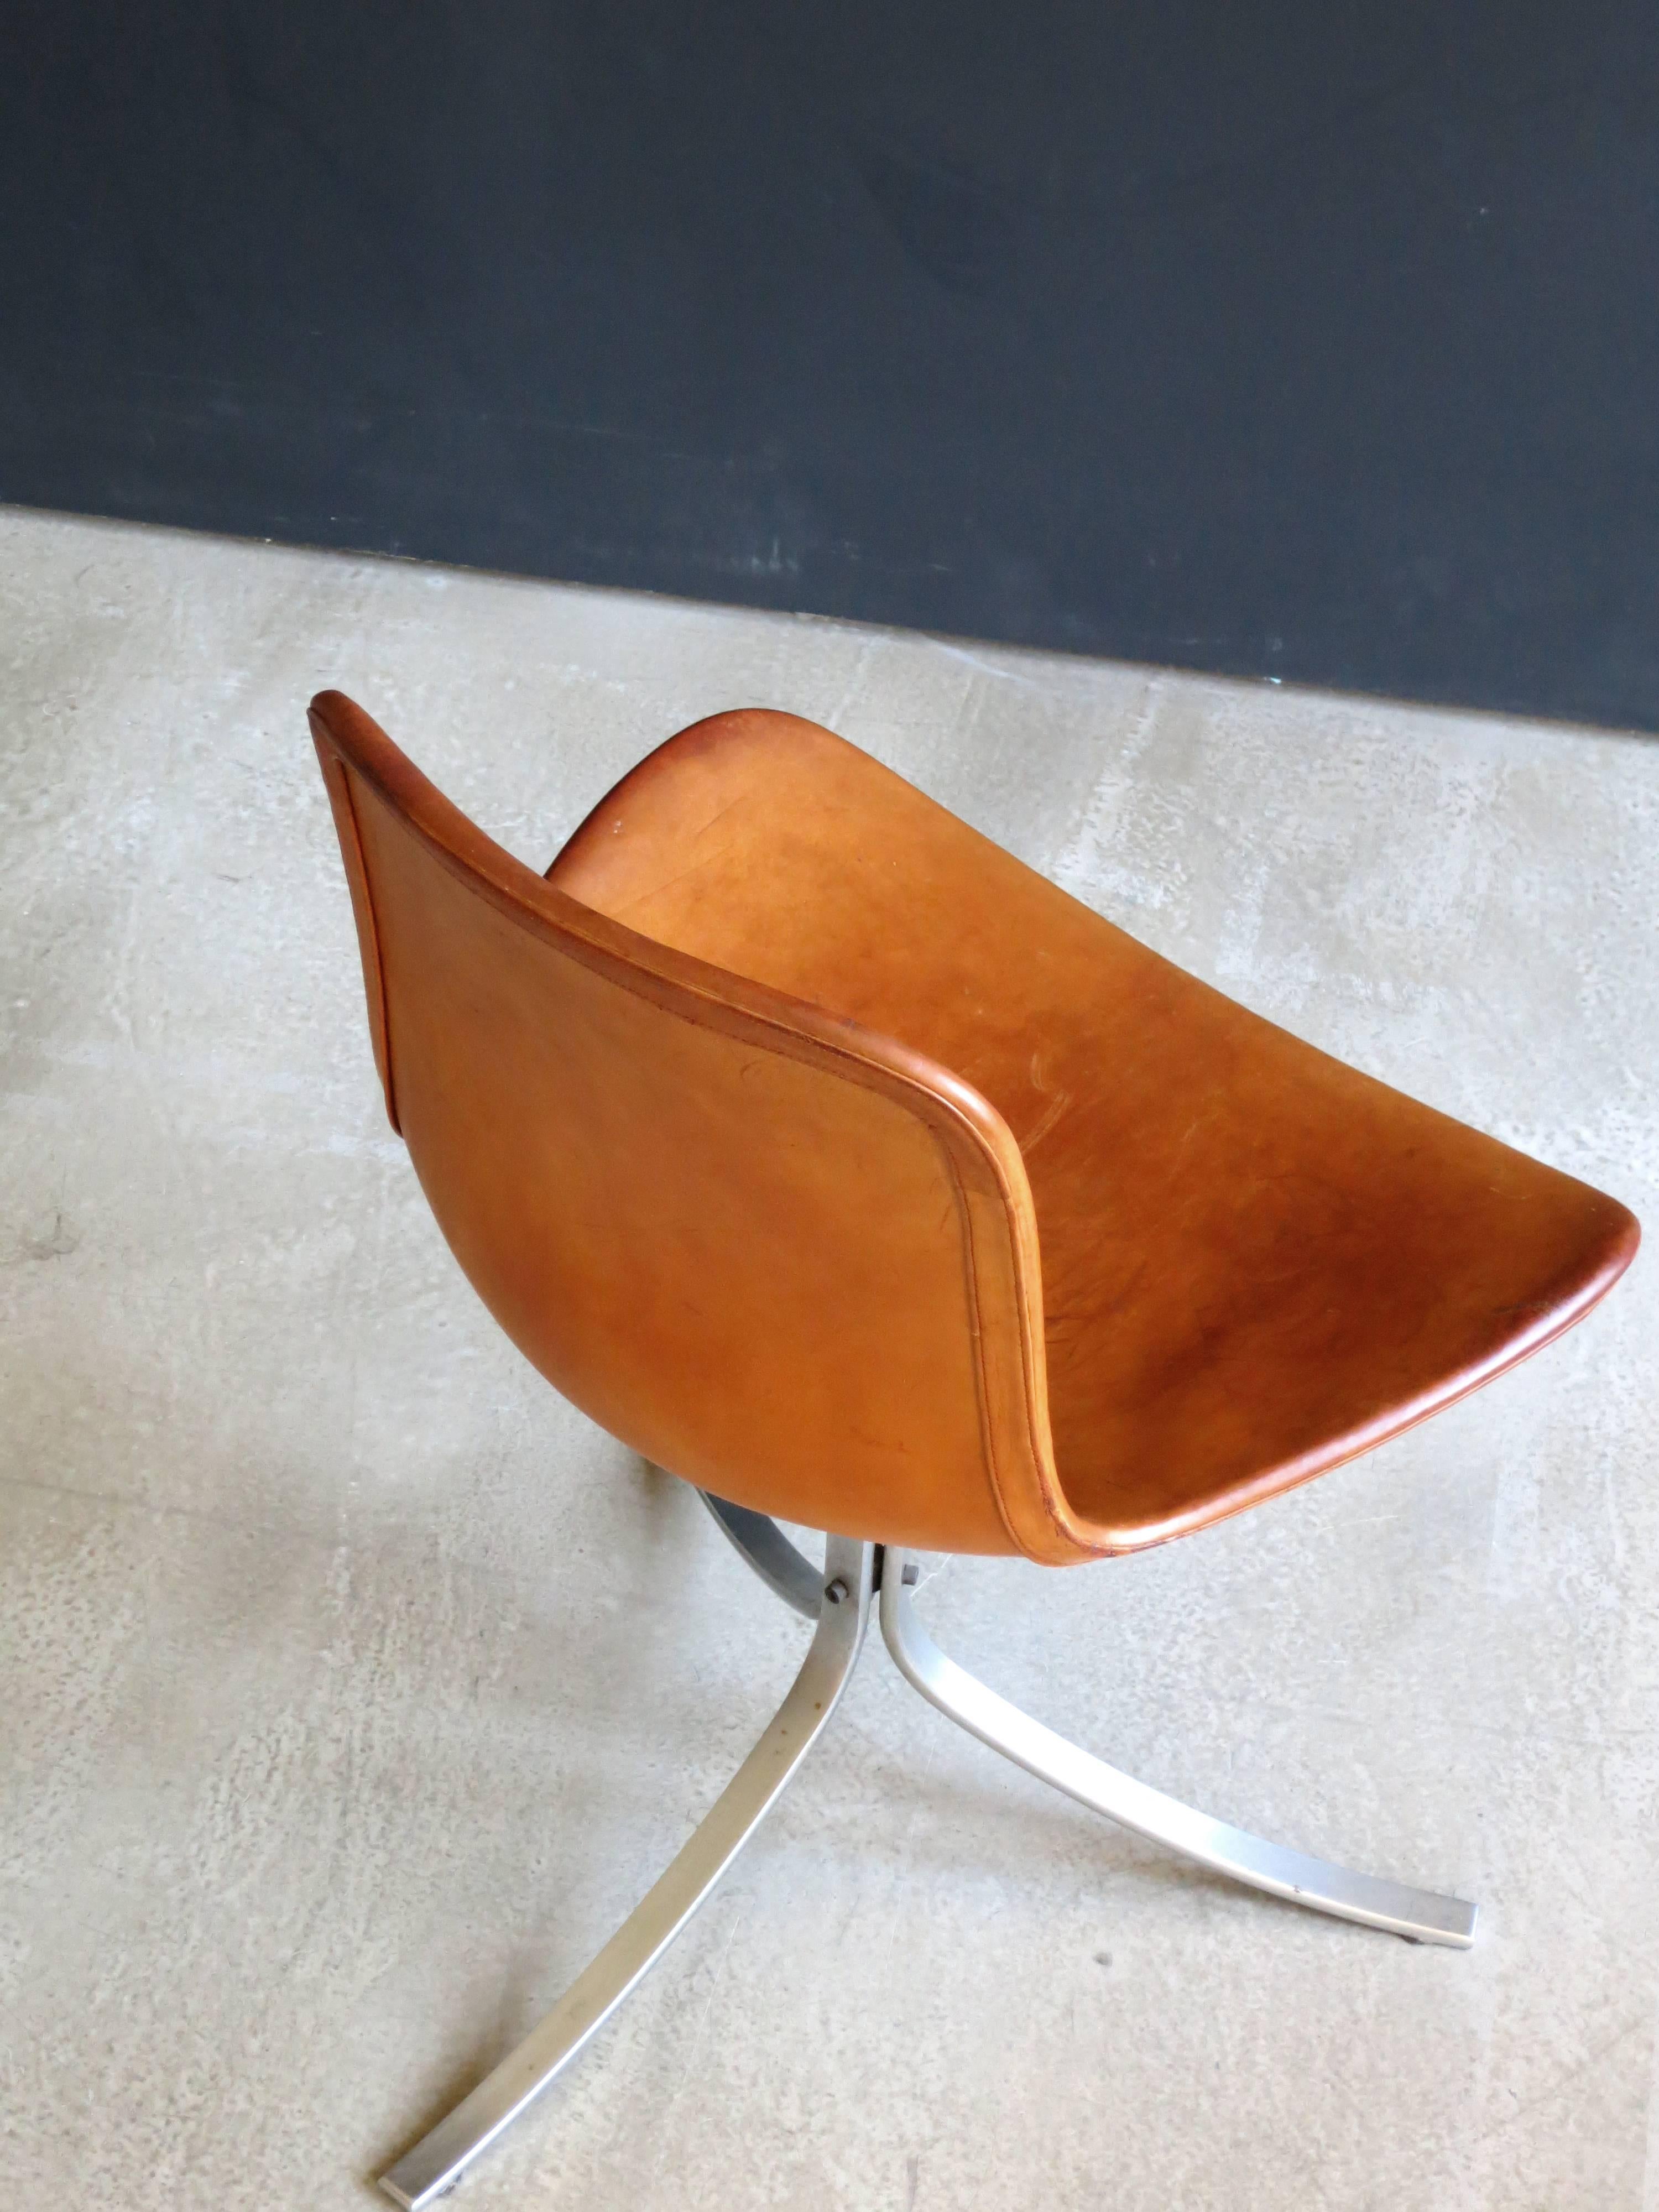 Mid-20th Century PK 9 Chair in Patinated Natural Saddle Leather by Poul Kjærholm For Sale